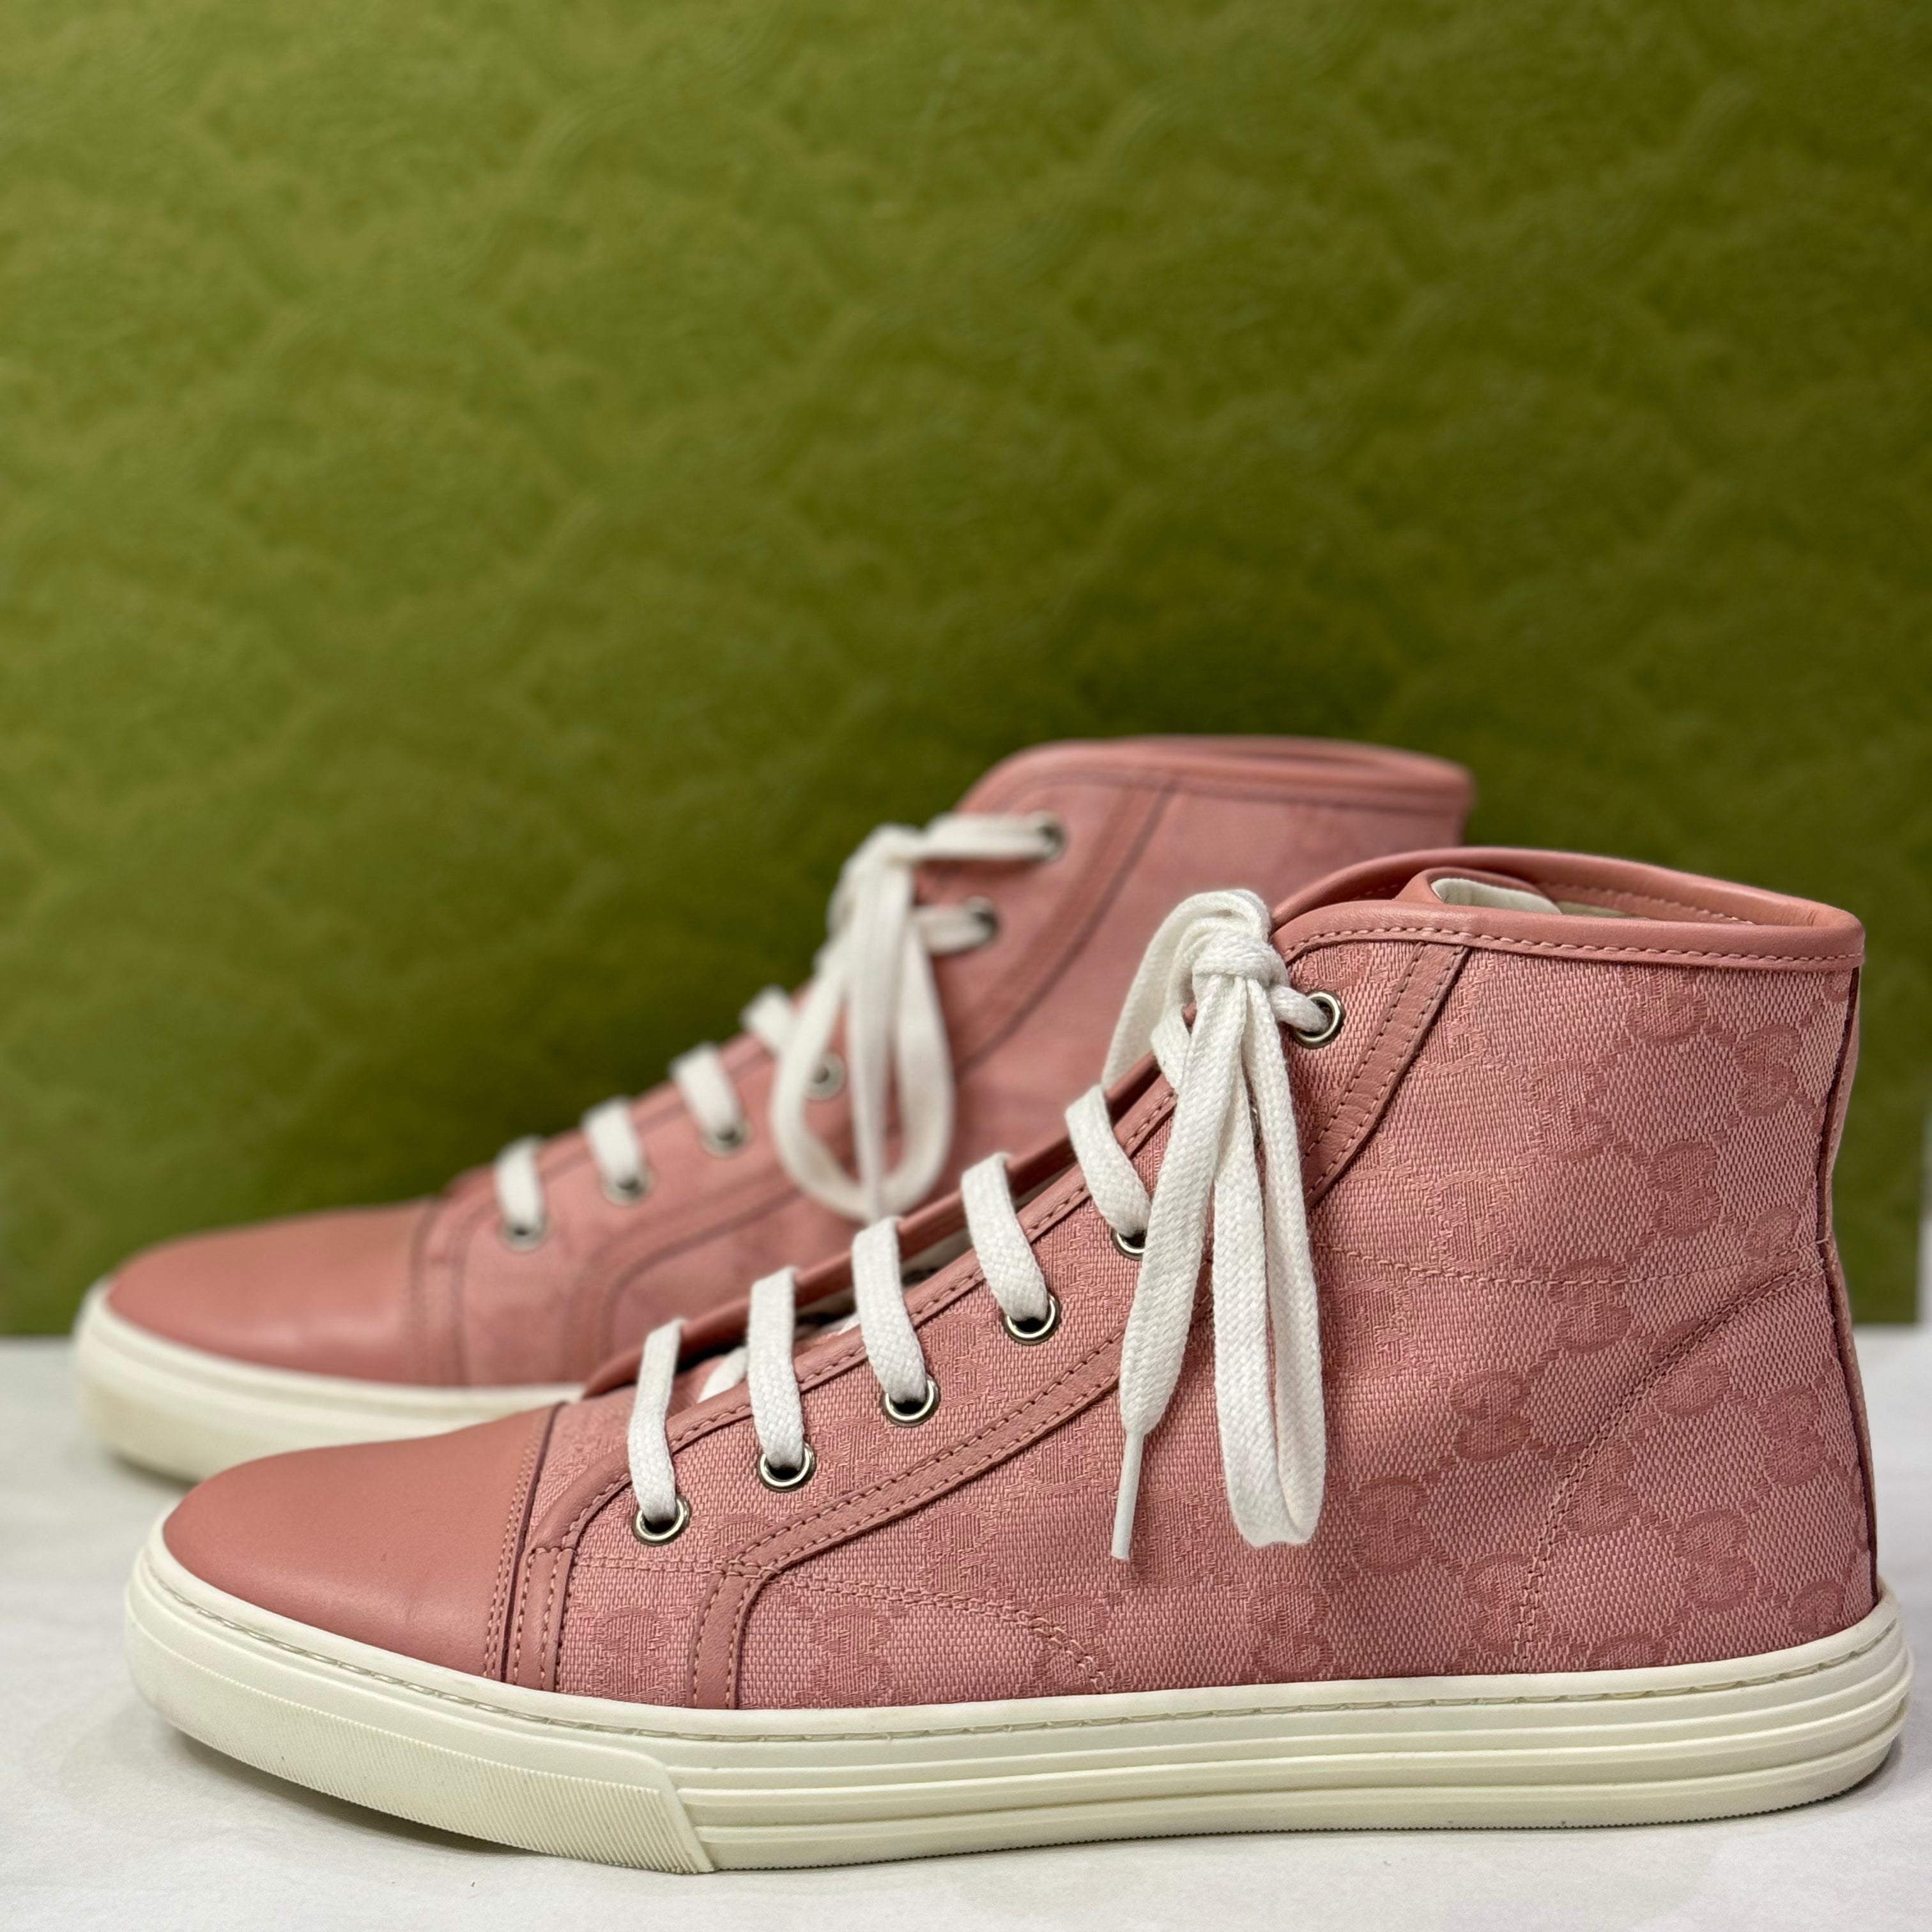 Gucci - High top sneakers T. 39.5